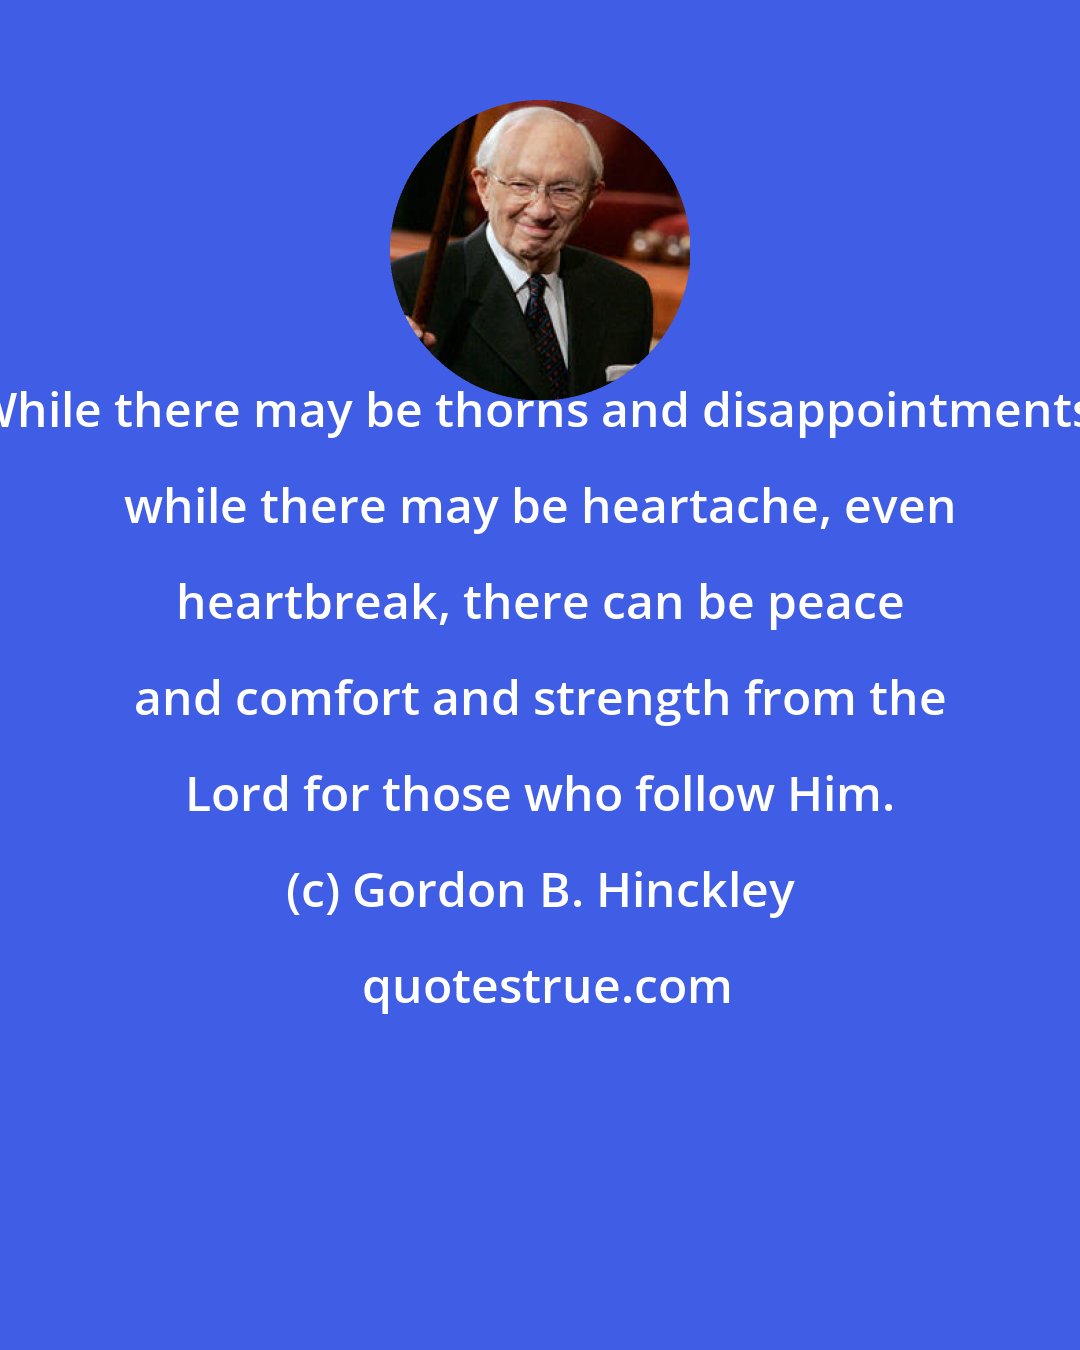 Gordon B. Hinckley: While there may be thorns and disappointments, while there may be heartache, even heartbreak, there can be peace and comfort and strength from the Lord for those who follow Him.